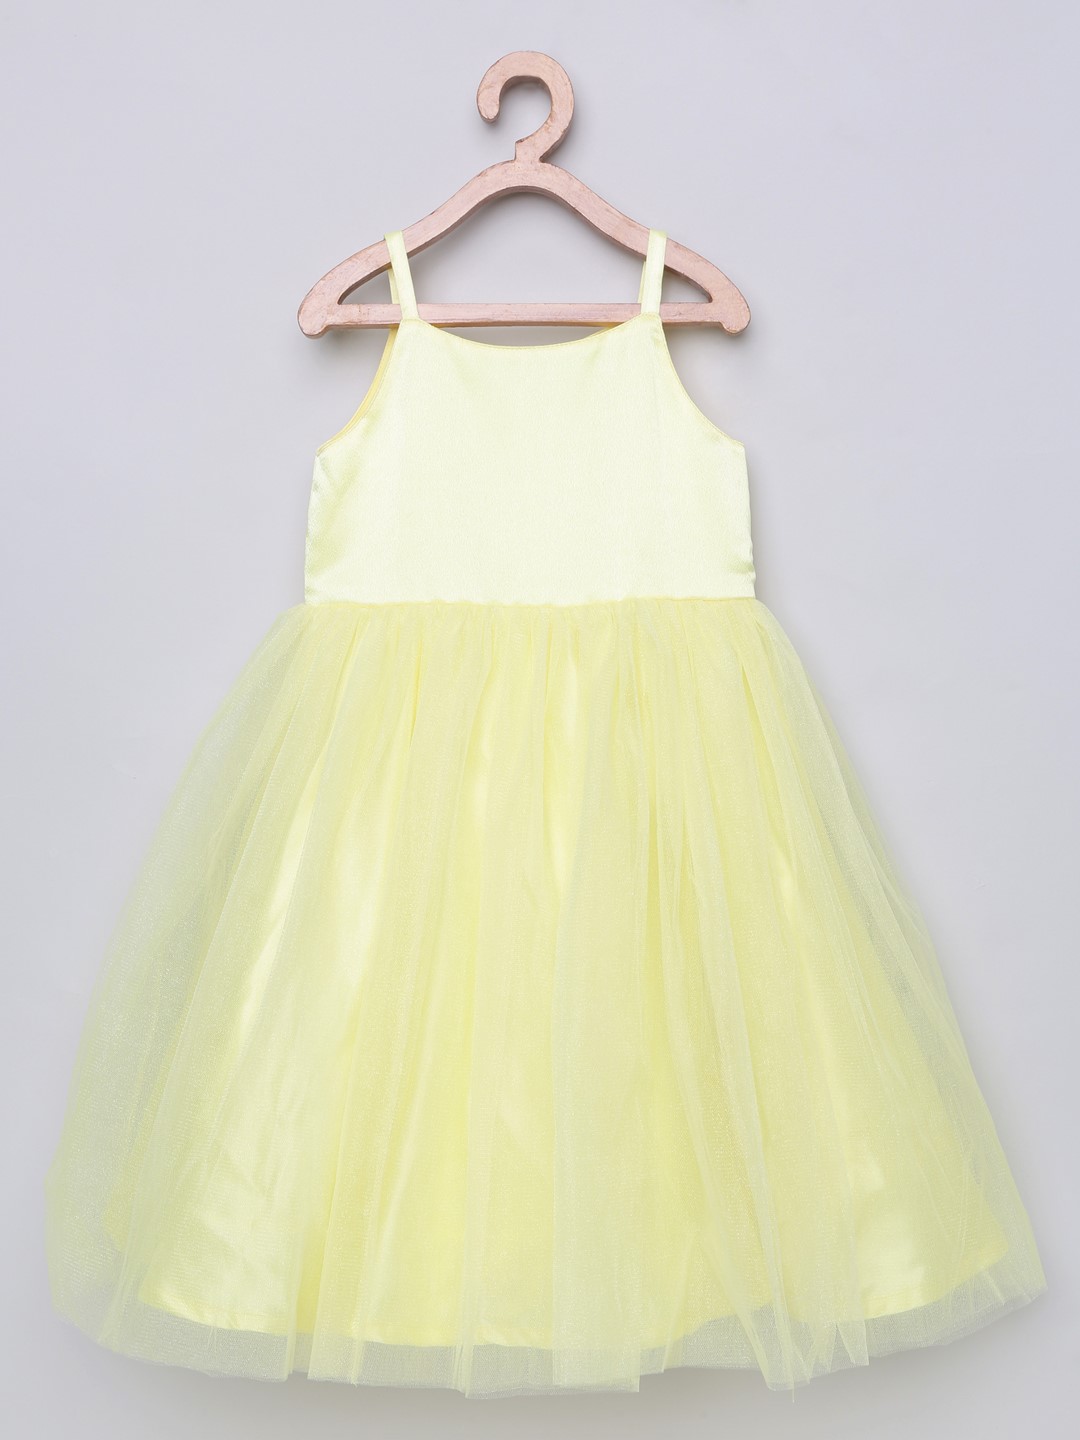 1 7 Gown with Lemon Embroided Patch and Peplum Jacket